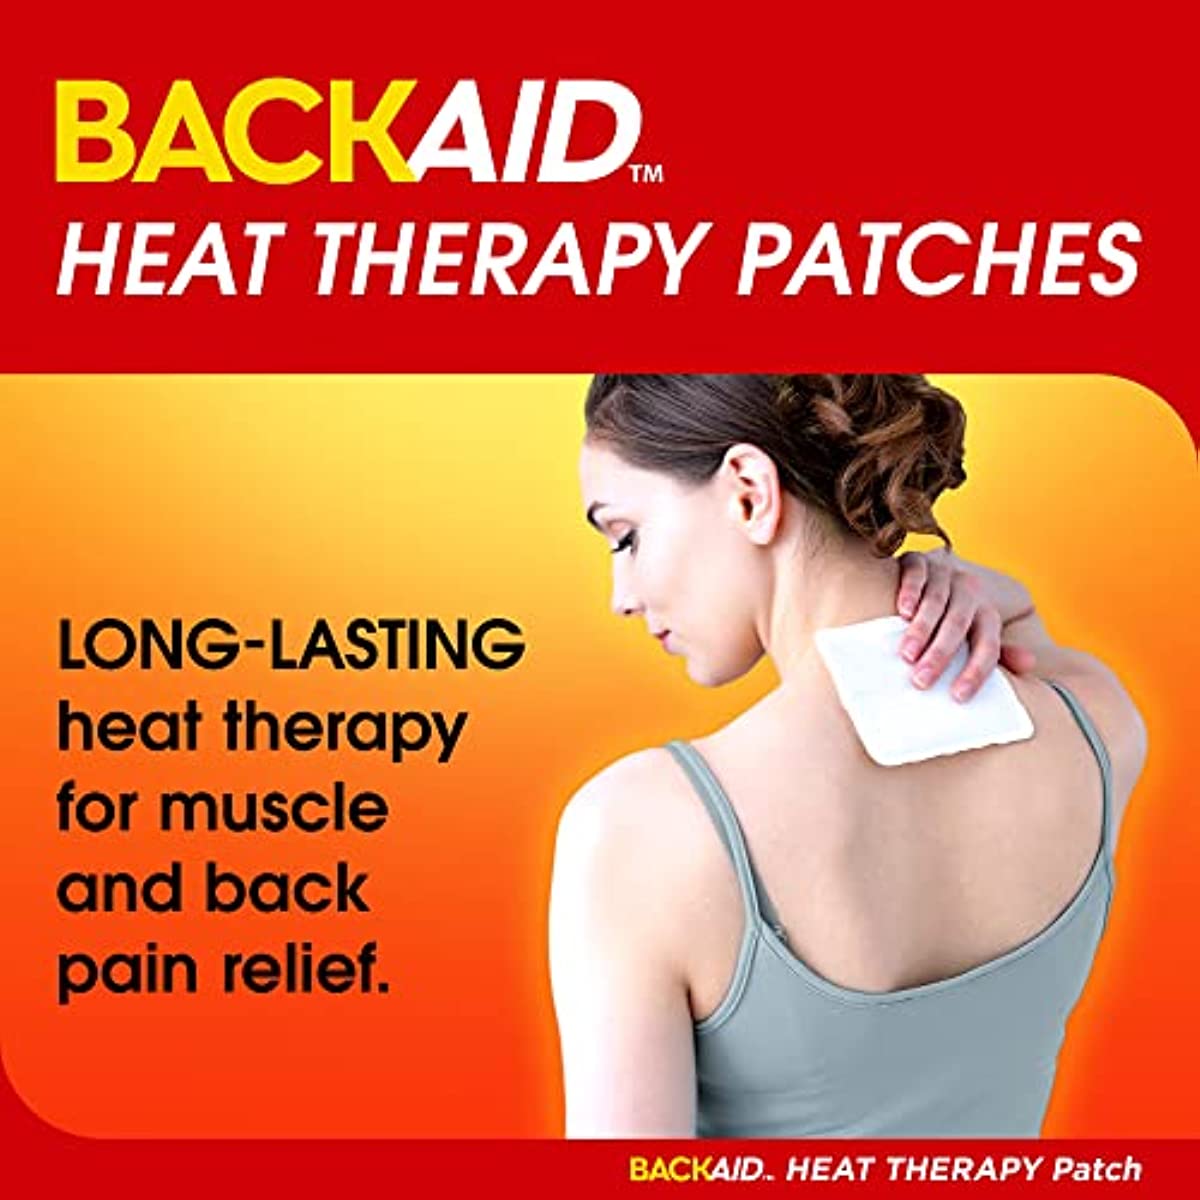 Backaid Heat Therapy Patch, Portable Heating Pad, Medium for Back, Shoulders, and Neck Pain Relief, 8 Count, White